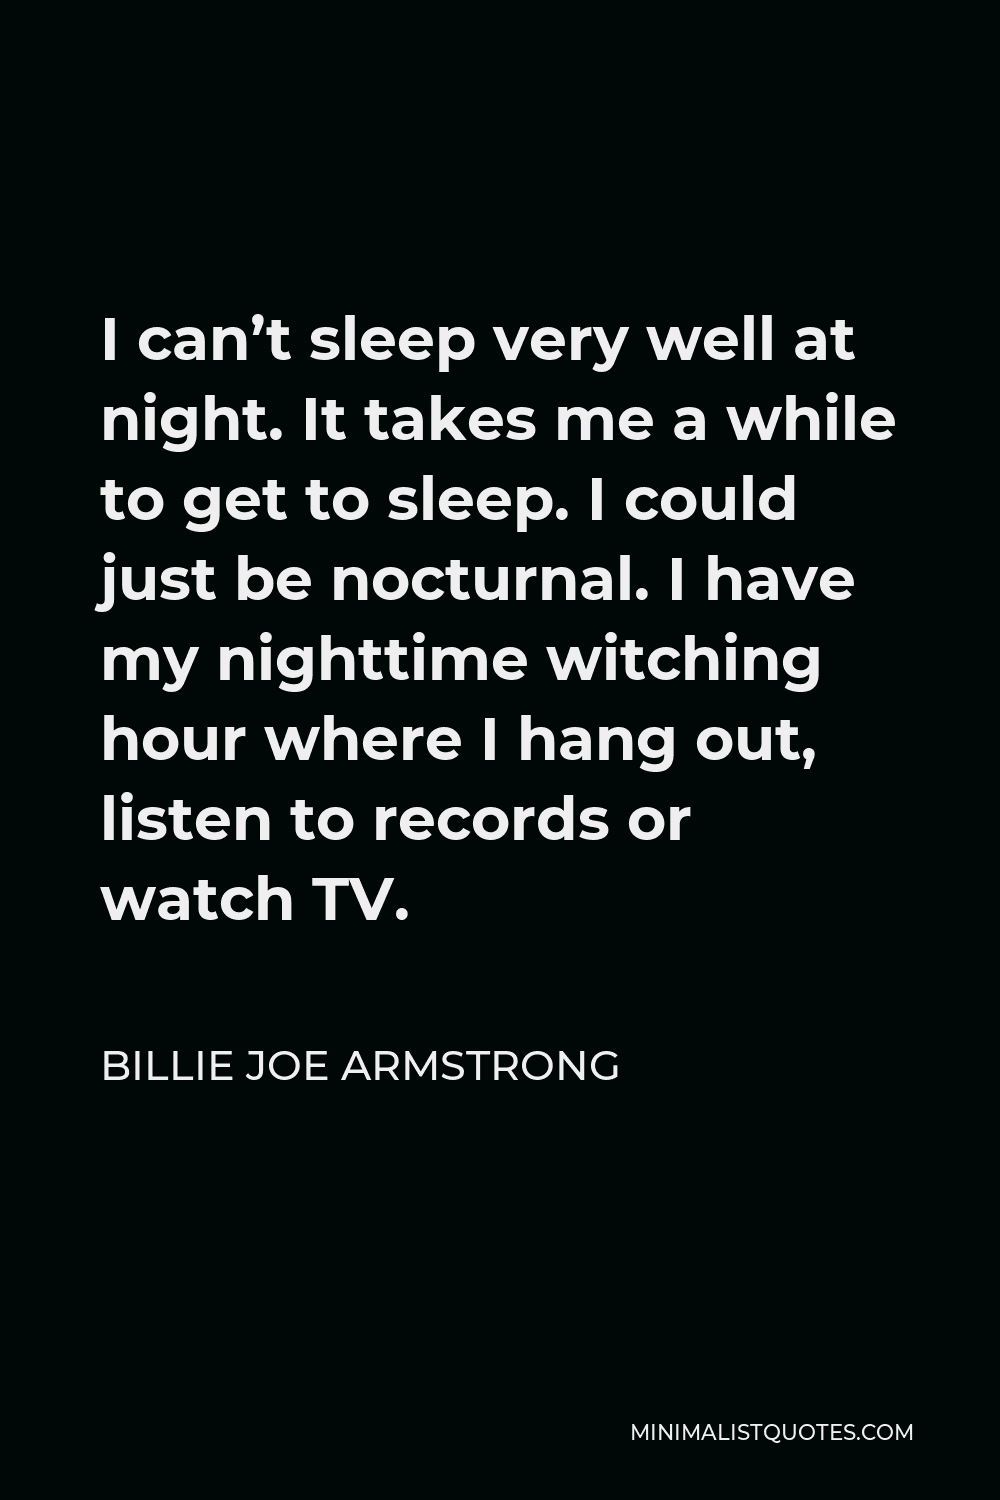 Billie Joe Armstrong Quote - I can’t sleep very well at night. It takes me a while to get to sleep. I could just be nocturnal. I have my nighttime witching hour where I hang out, listen to records or watch TV.